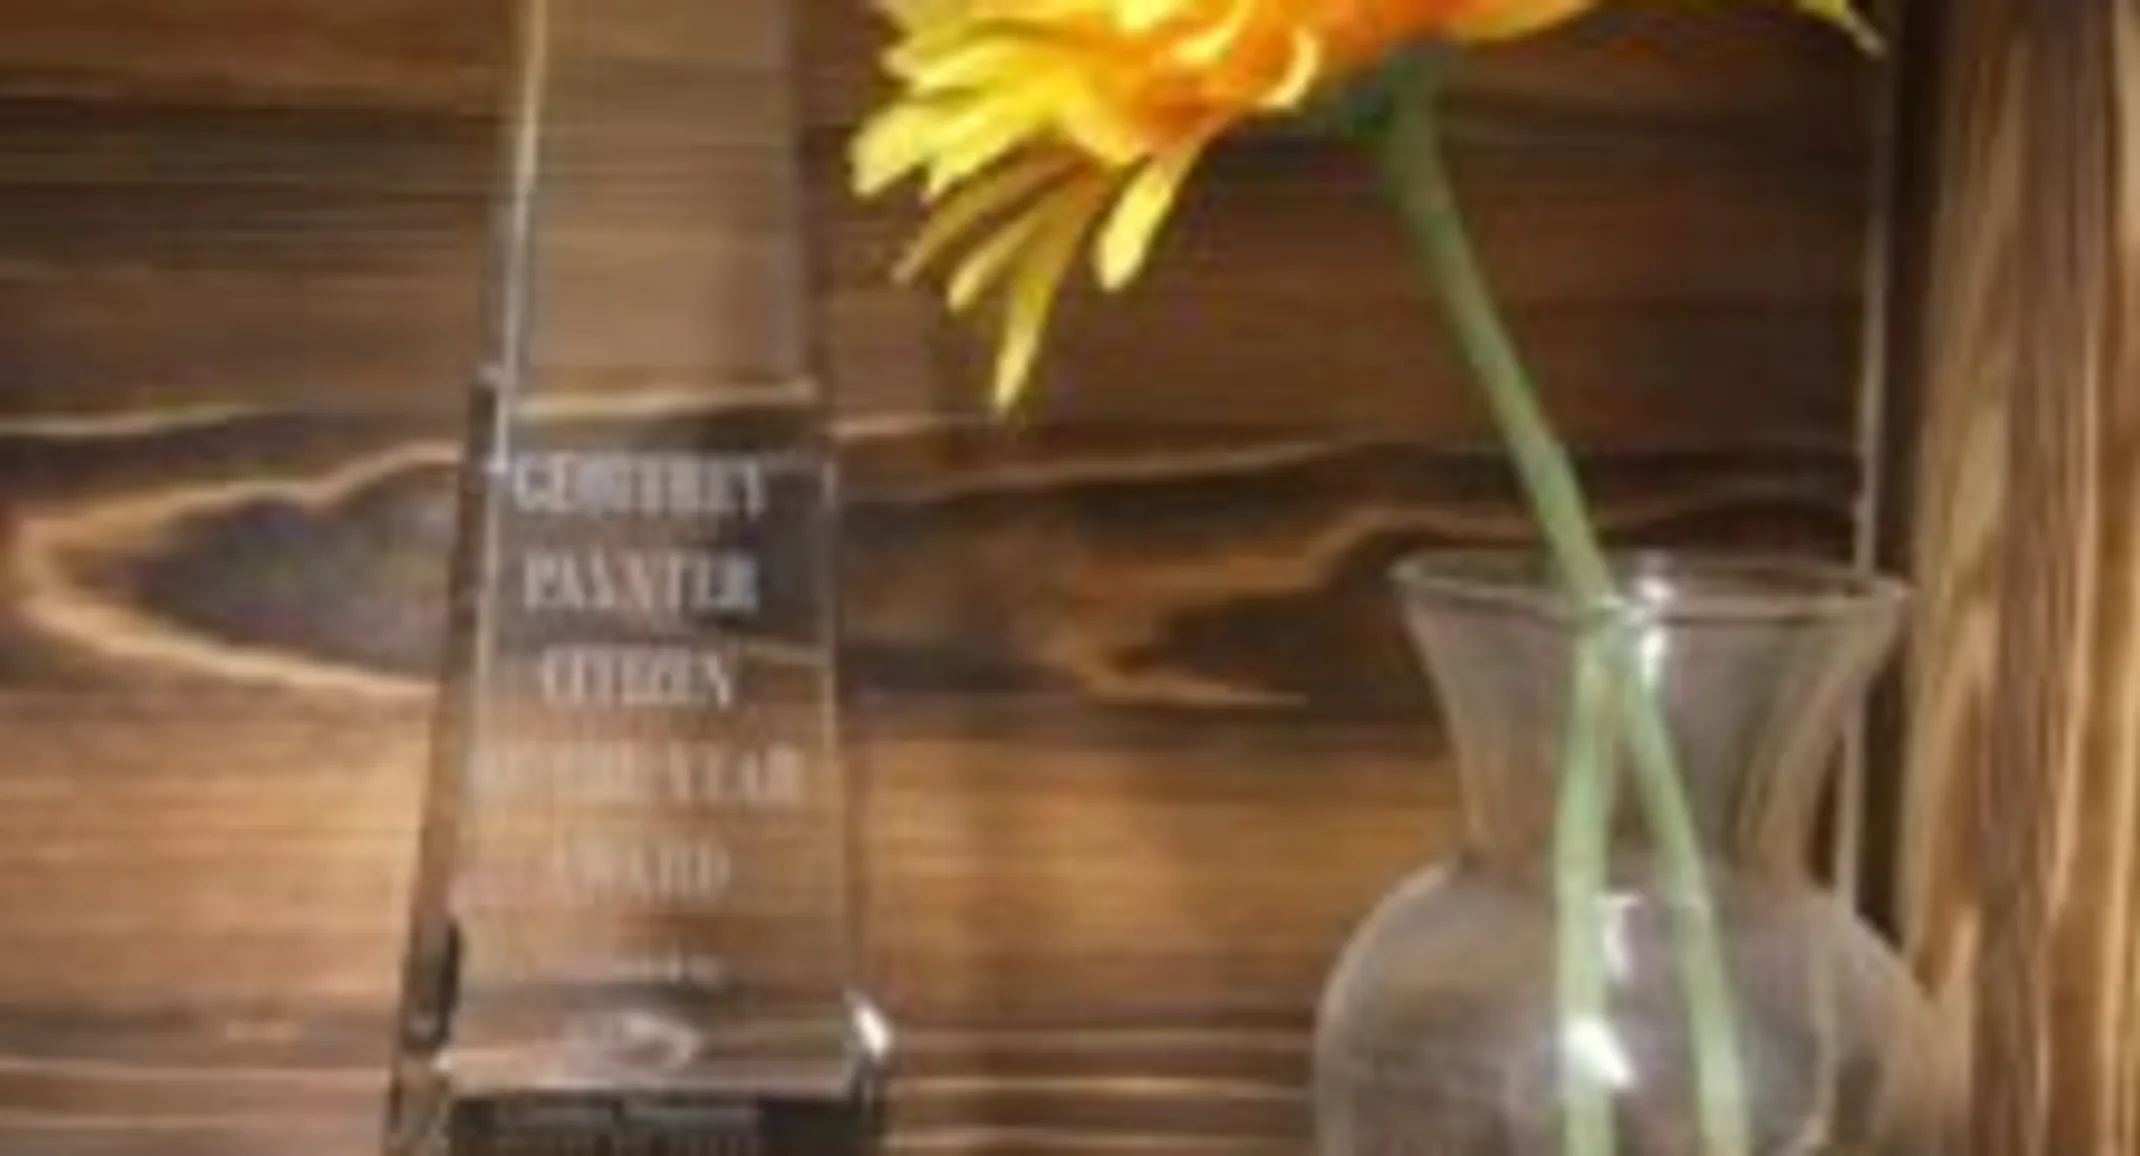 Geoffrey Paynter Citizen of the Year Award for Dr. Moshe Oz